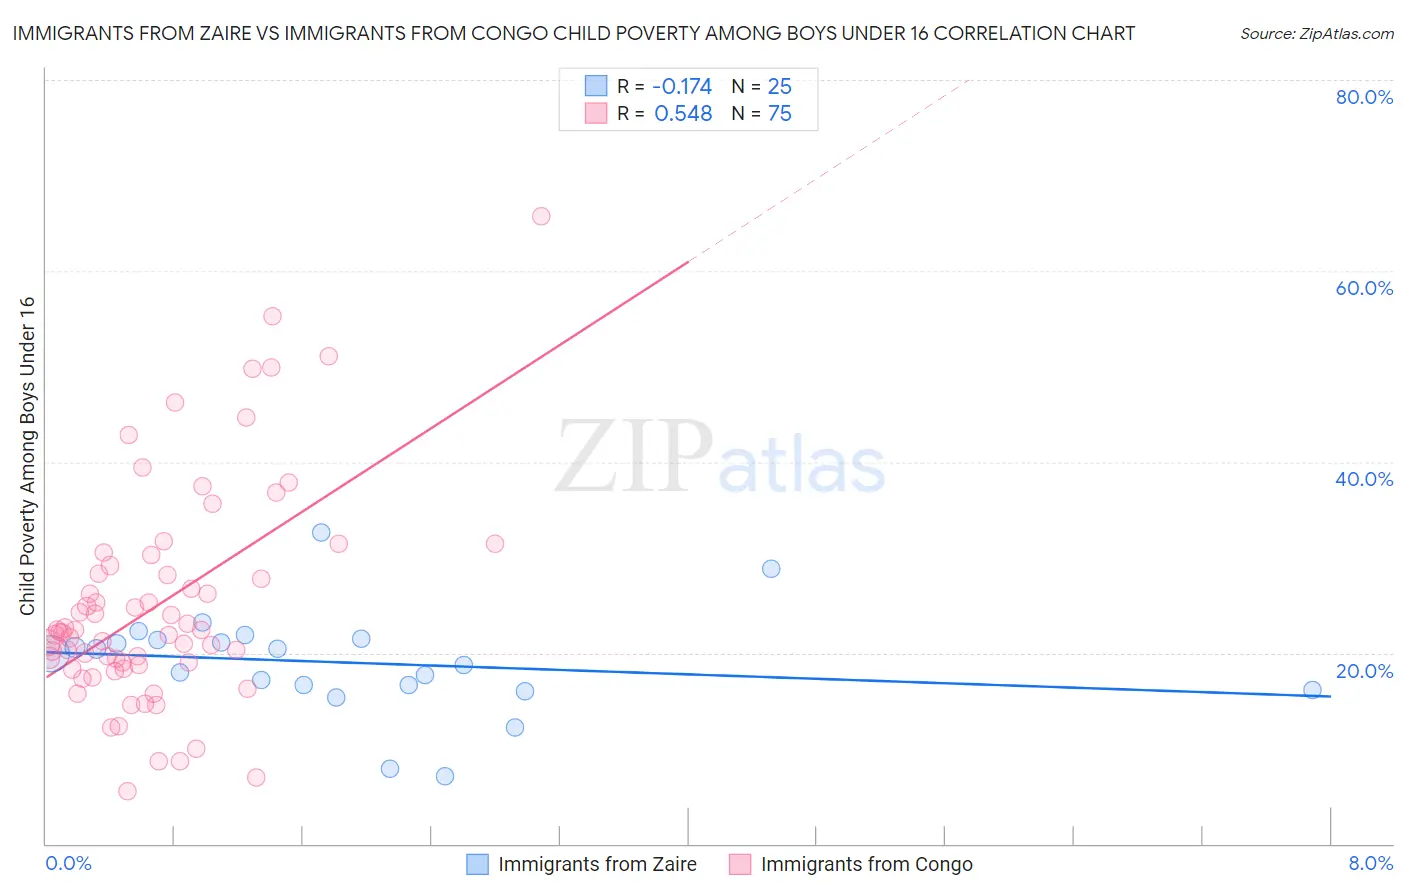 Immigrants from Zaire vs Immigrants from Congo Child Poverty Among Boys Under 16